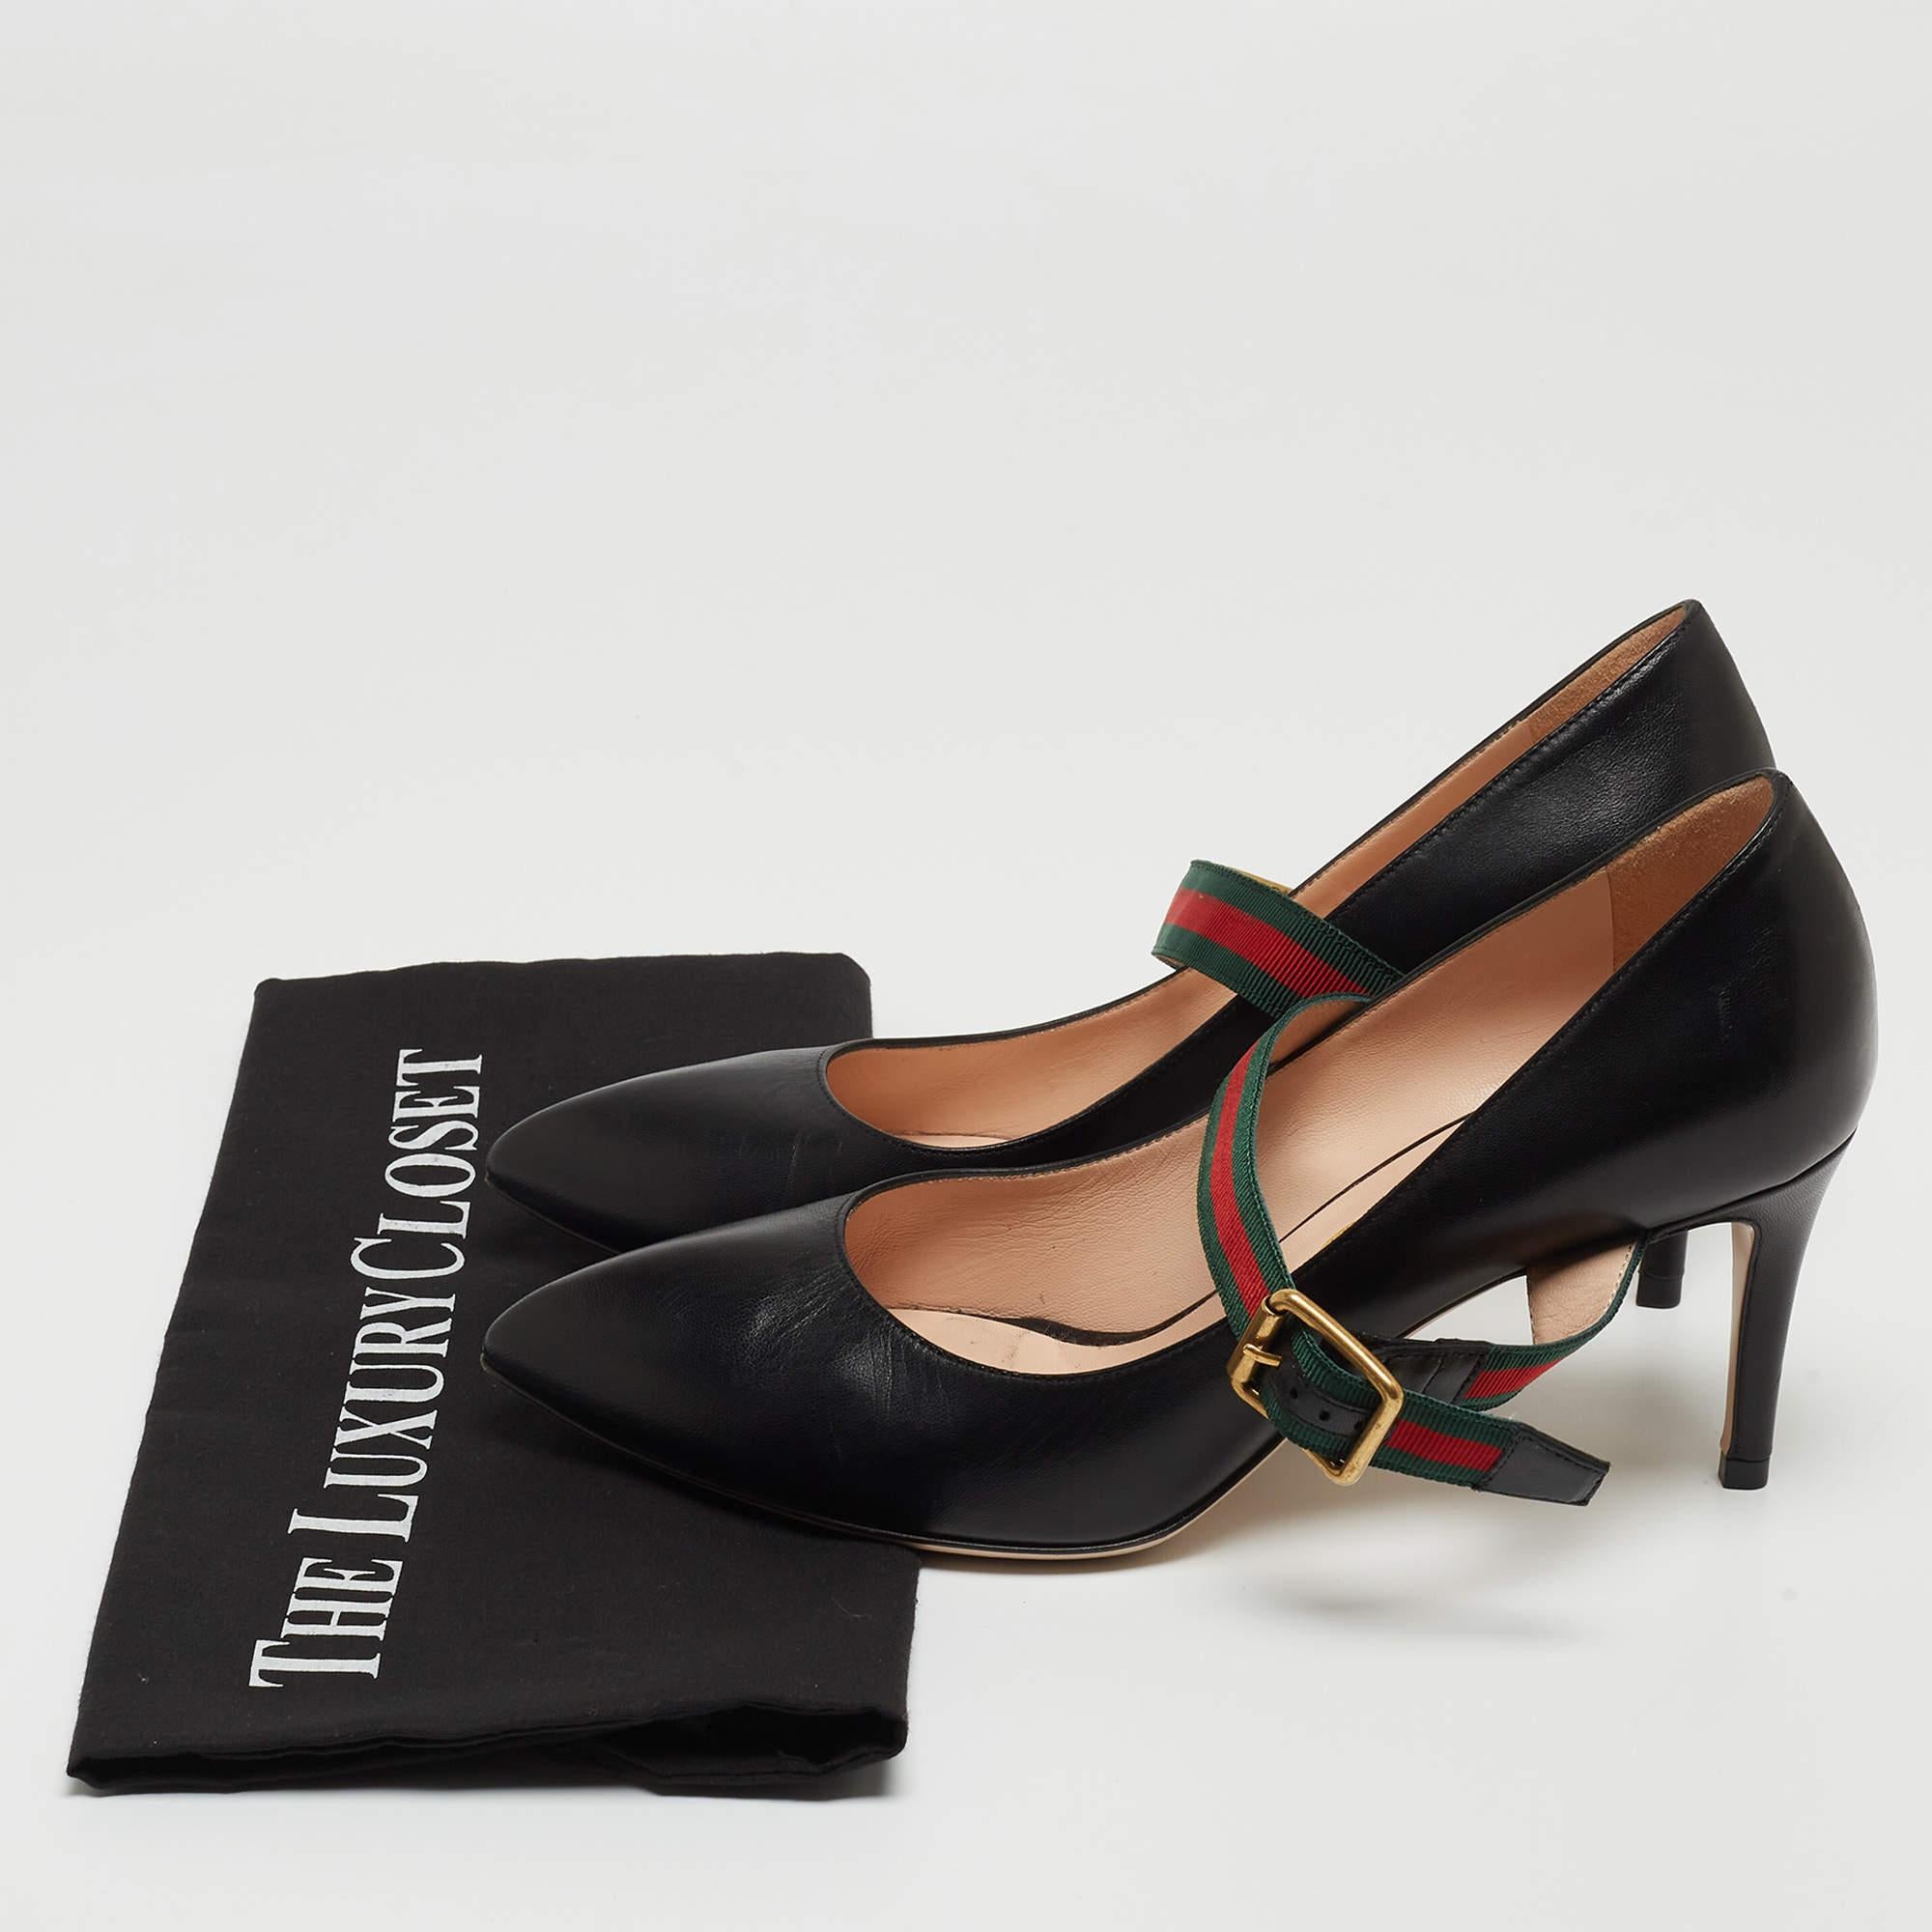 Gucci Black Leather Mary Jane Sylvie Pumps Size 37.5 5